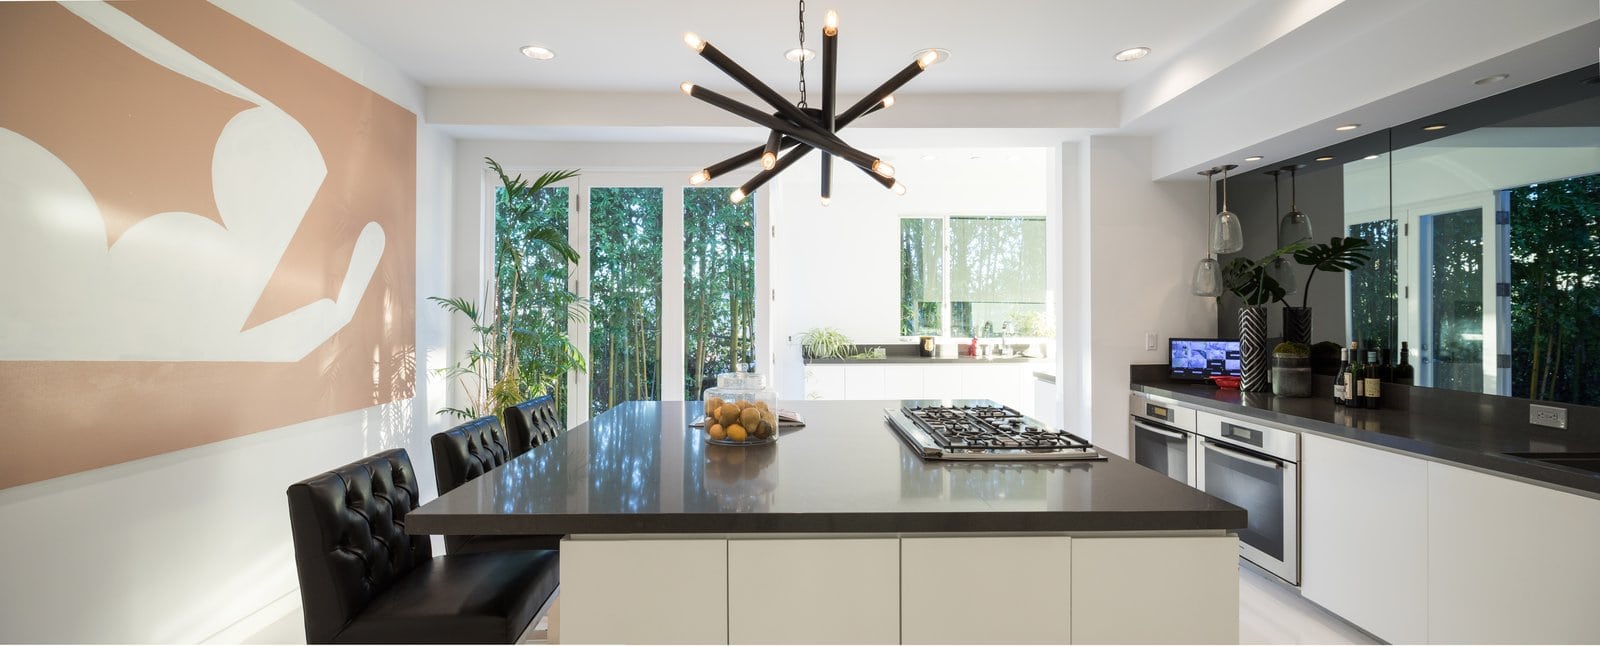 the-sleek-modern-kitchen-is-perfect-for-cooking-and-entertaining-with-a-large-island-and-designer-appliances